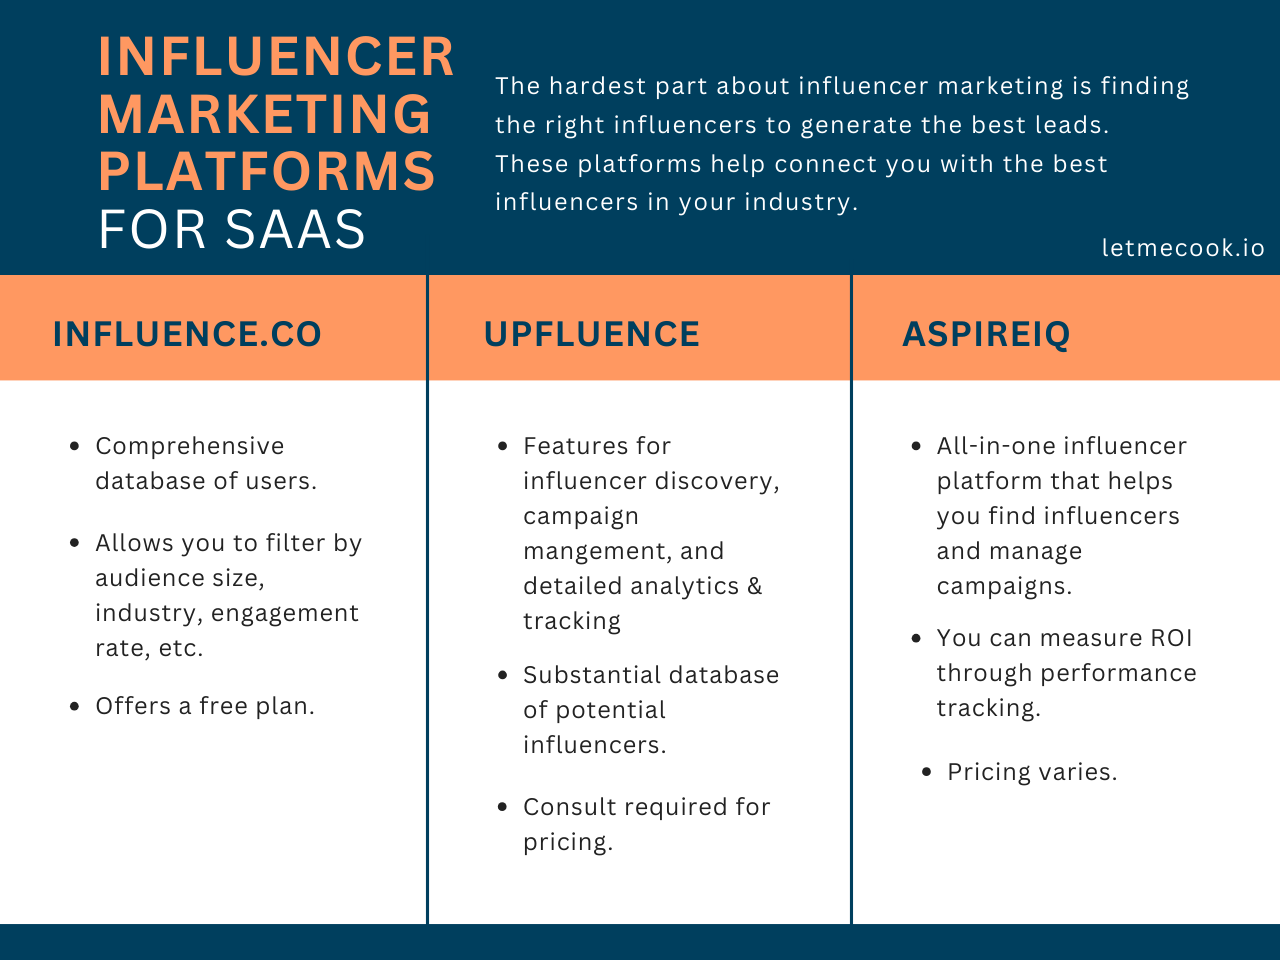 SaaS product marketing solutions - Influencer marketing platforms for SaaS. Don't miss the other 8 solutions in the full article.